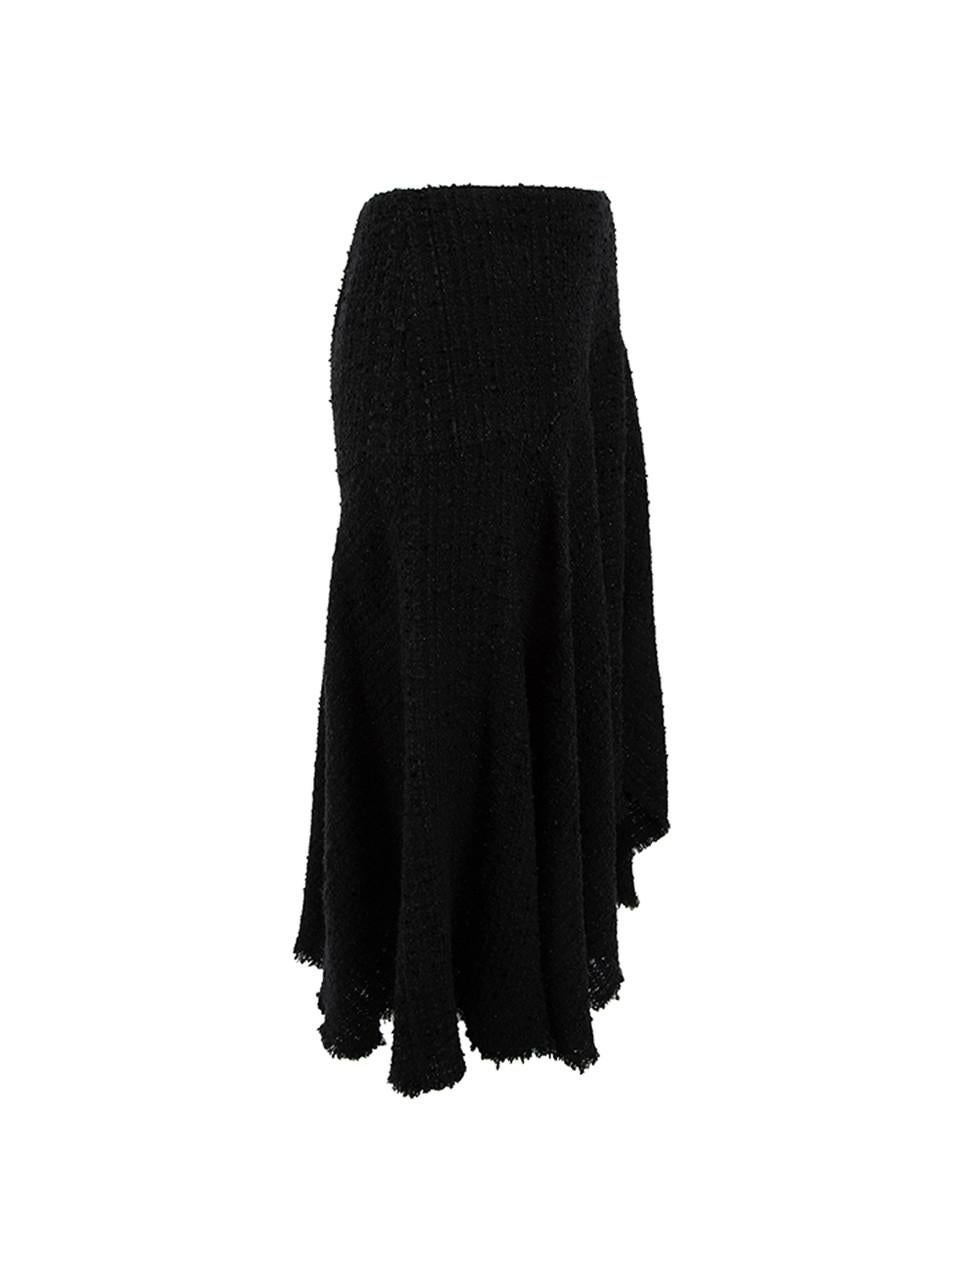 CONDITION is Very good. Minimal wear to skirt is evident. Minimal wear to the frayed edges at the bottom of skirt on this used Alexander McQueen designer resale item.   Details  Black Tweed Midi skirt Metallic threading Asymmetric hemline Back zip